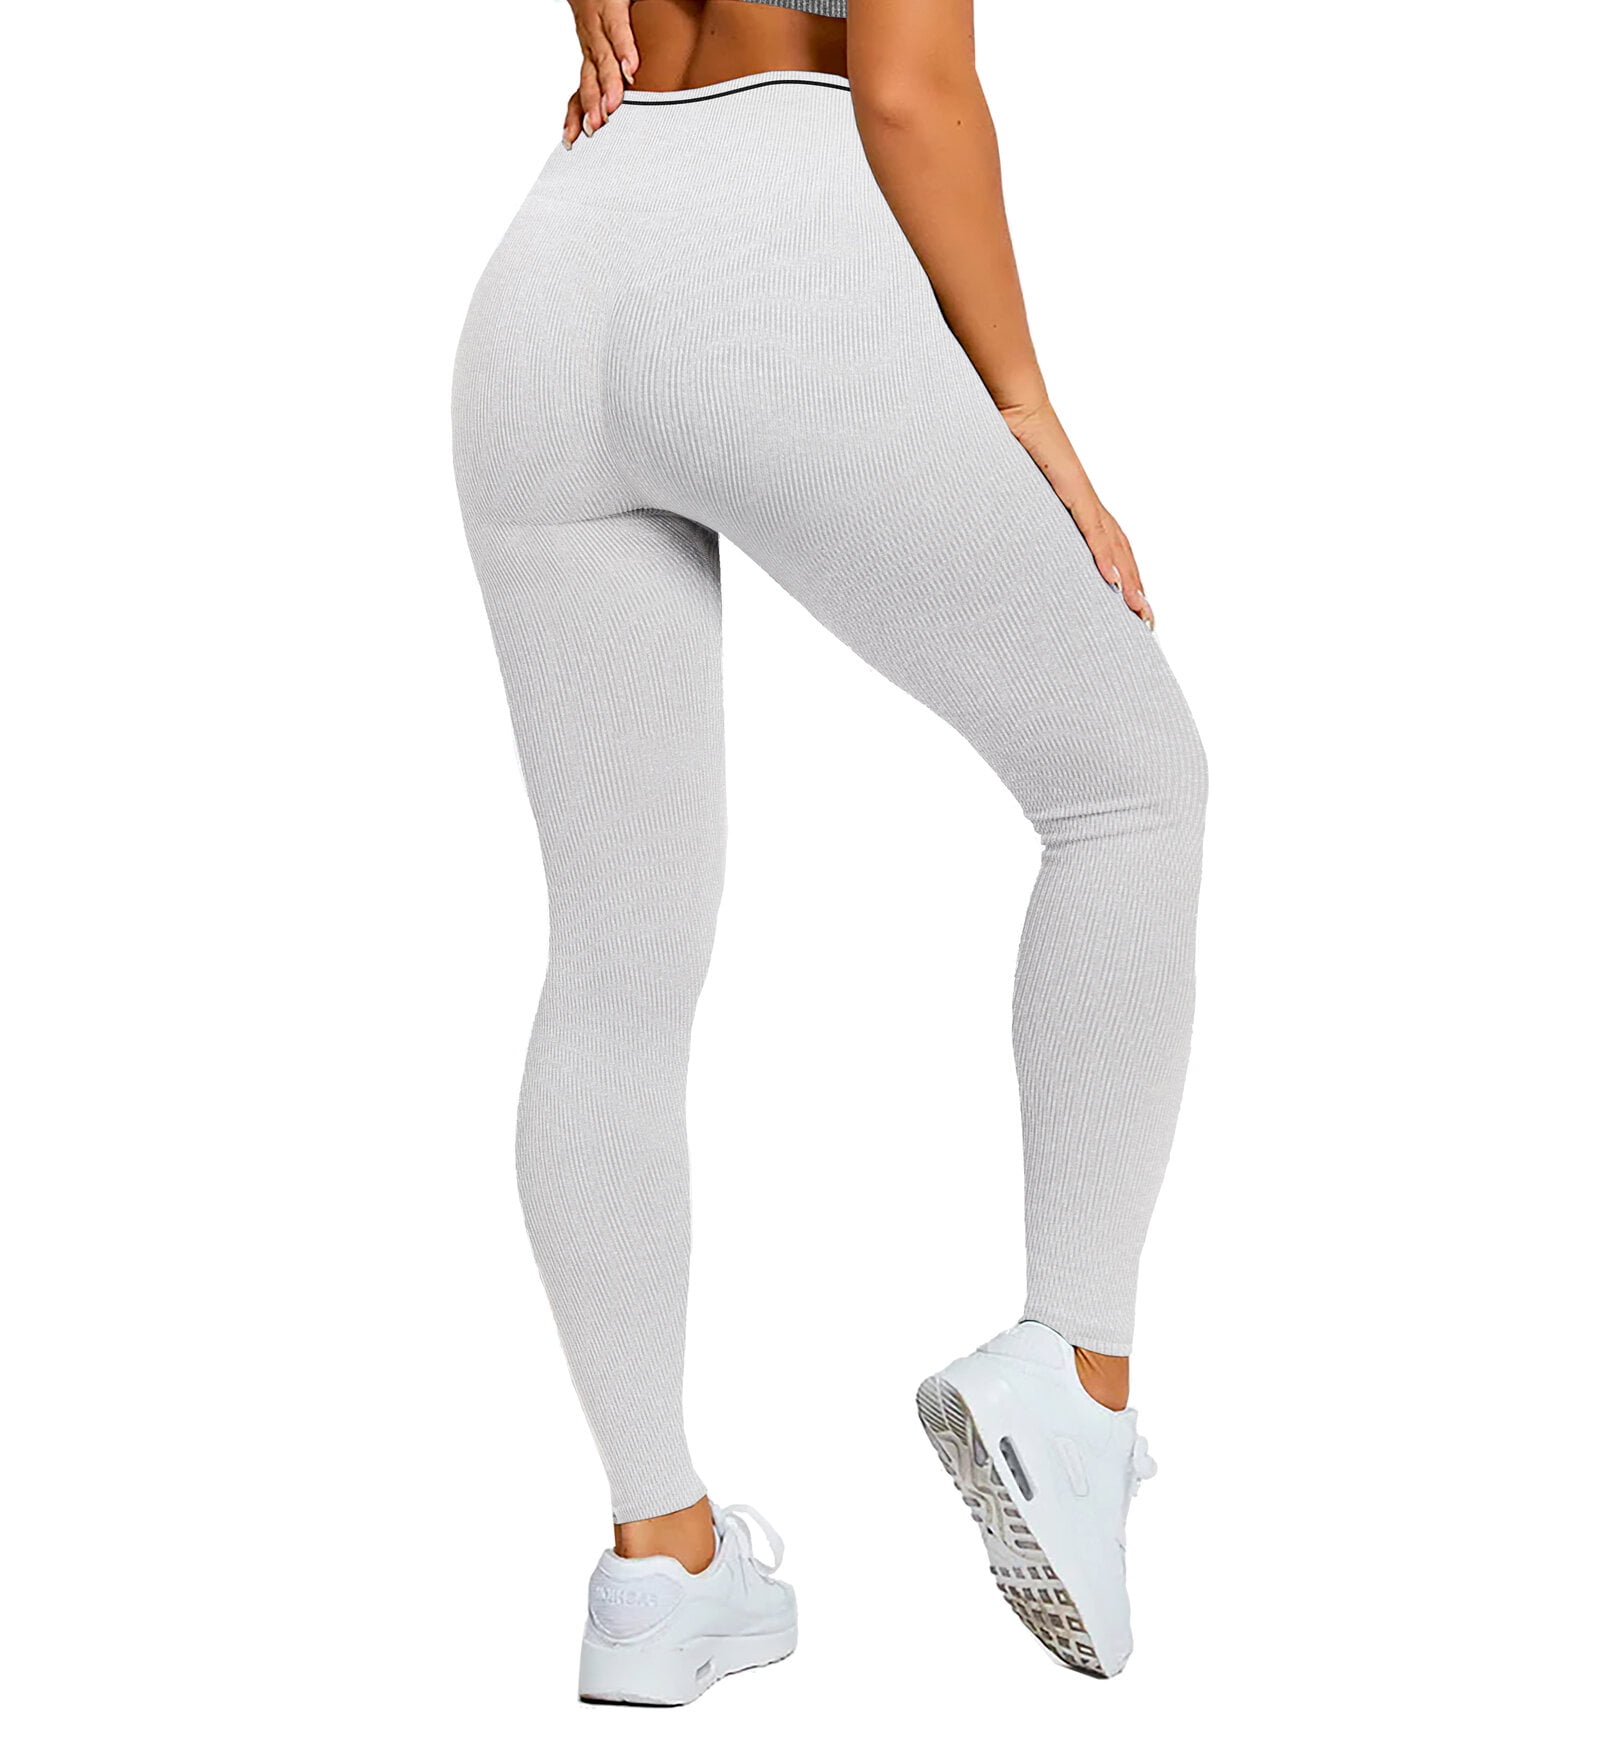 High Waist Seamless Push Up Grey Gym Leggings For Women Sexy Butt Lifting  Sports Gym Workout Legging 210708 From Dou01, $13.24